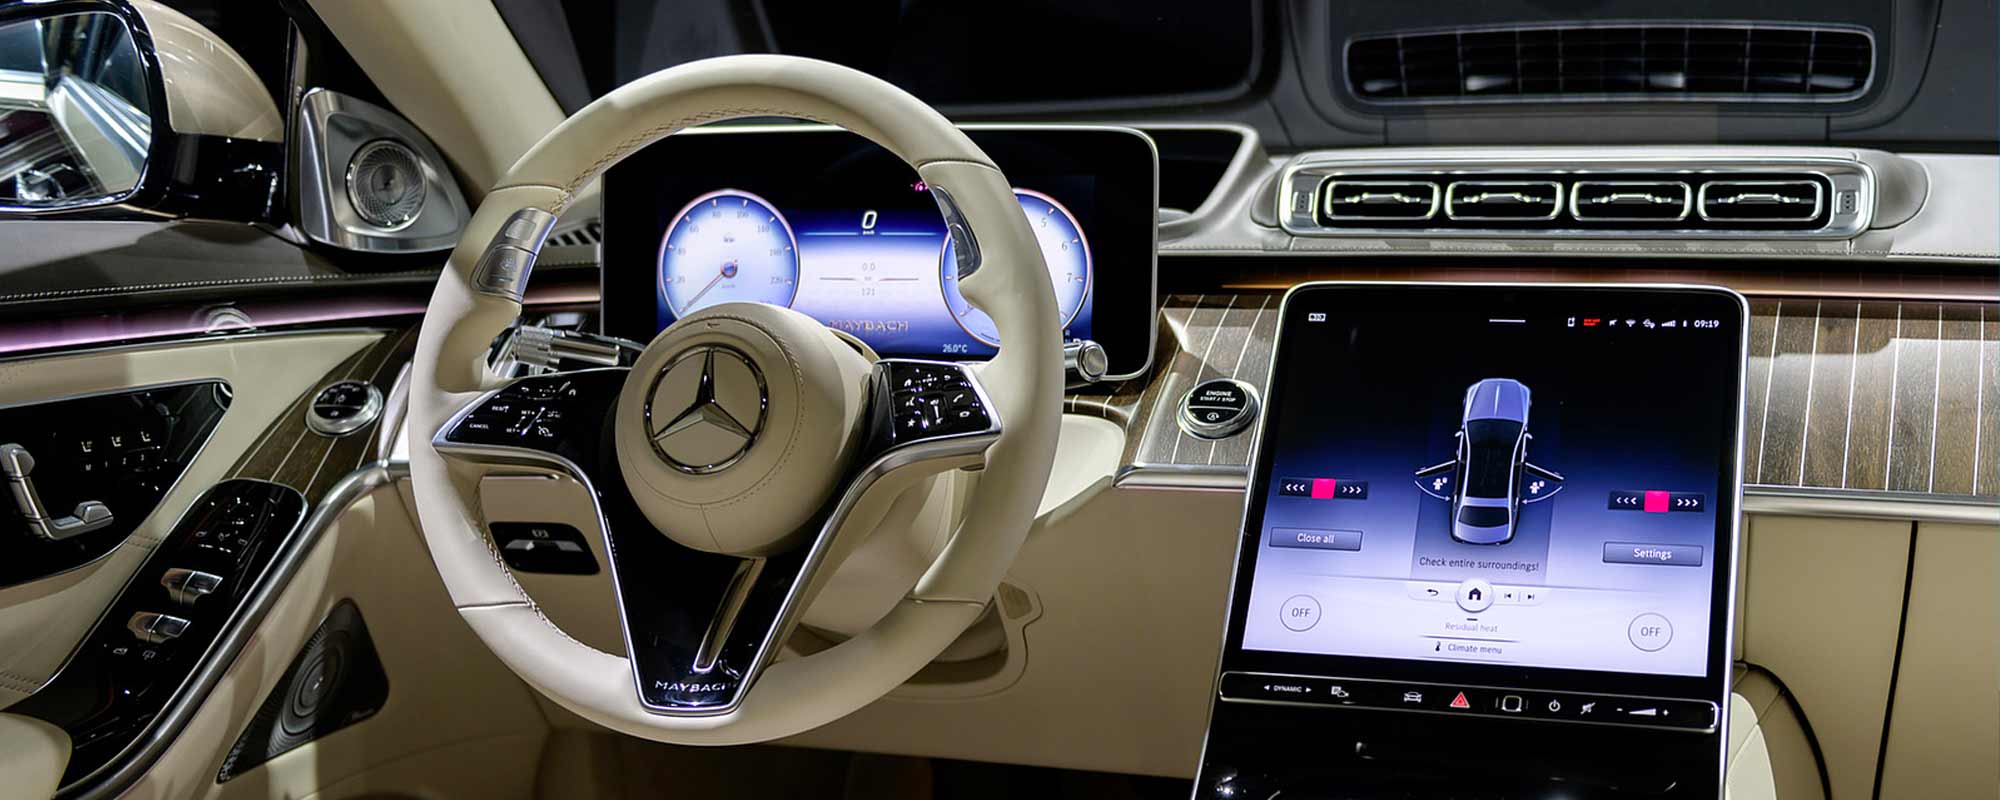 SLC - Starr Luxury Cars, Self Drive and Chauffeur Service VIP Services in San Antonio - Exotic Cars Globally